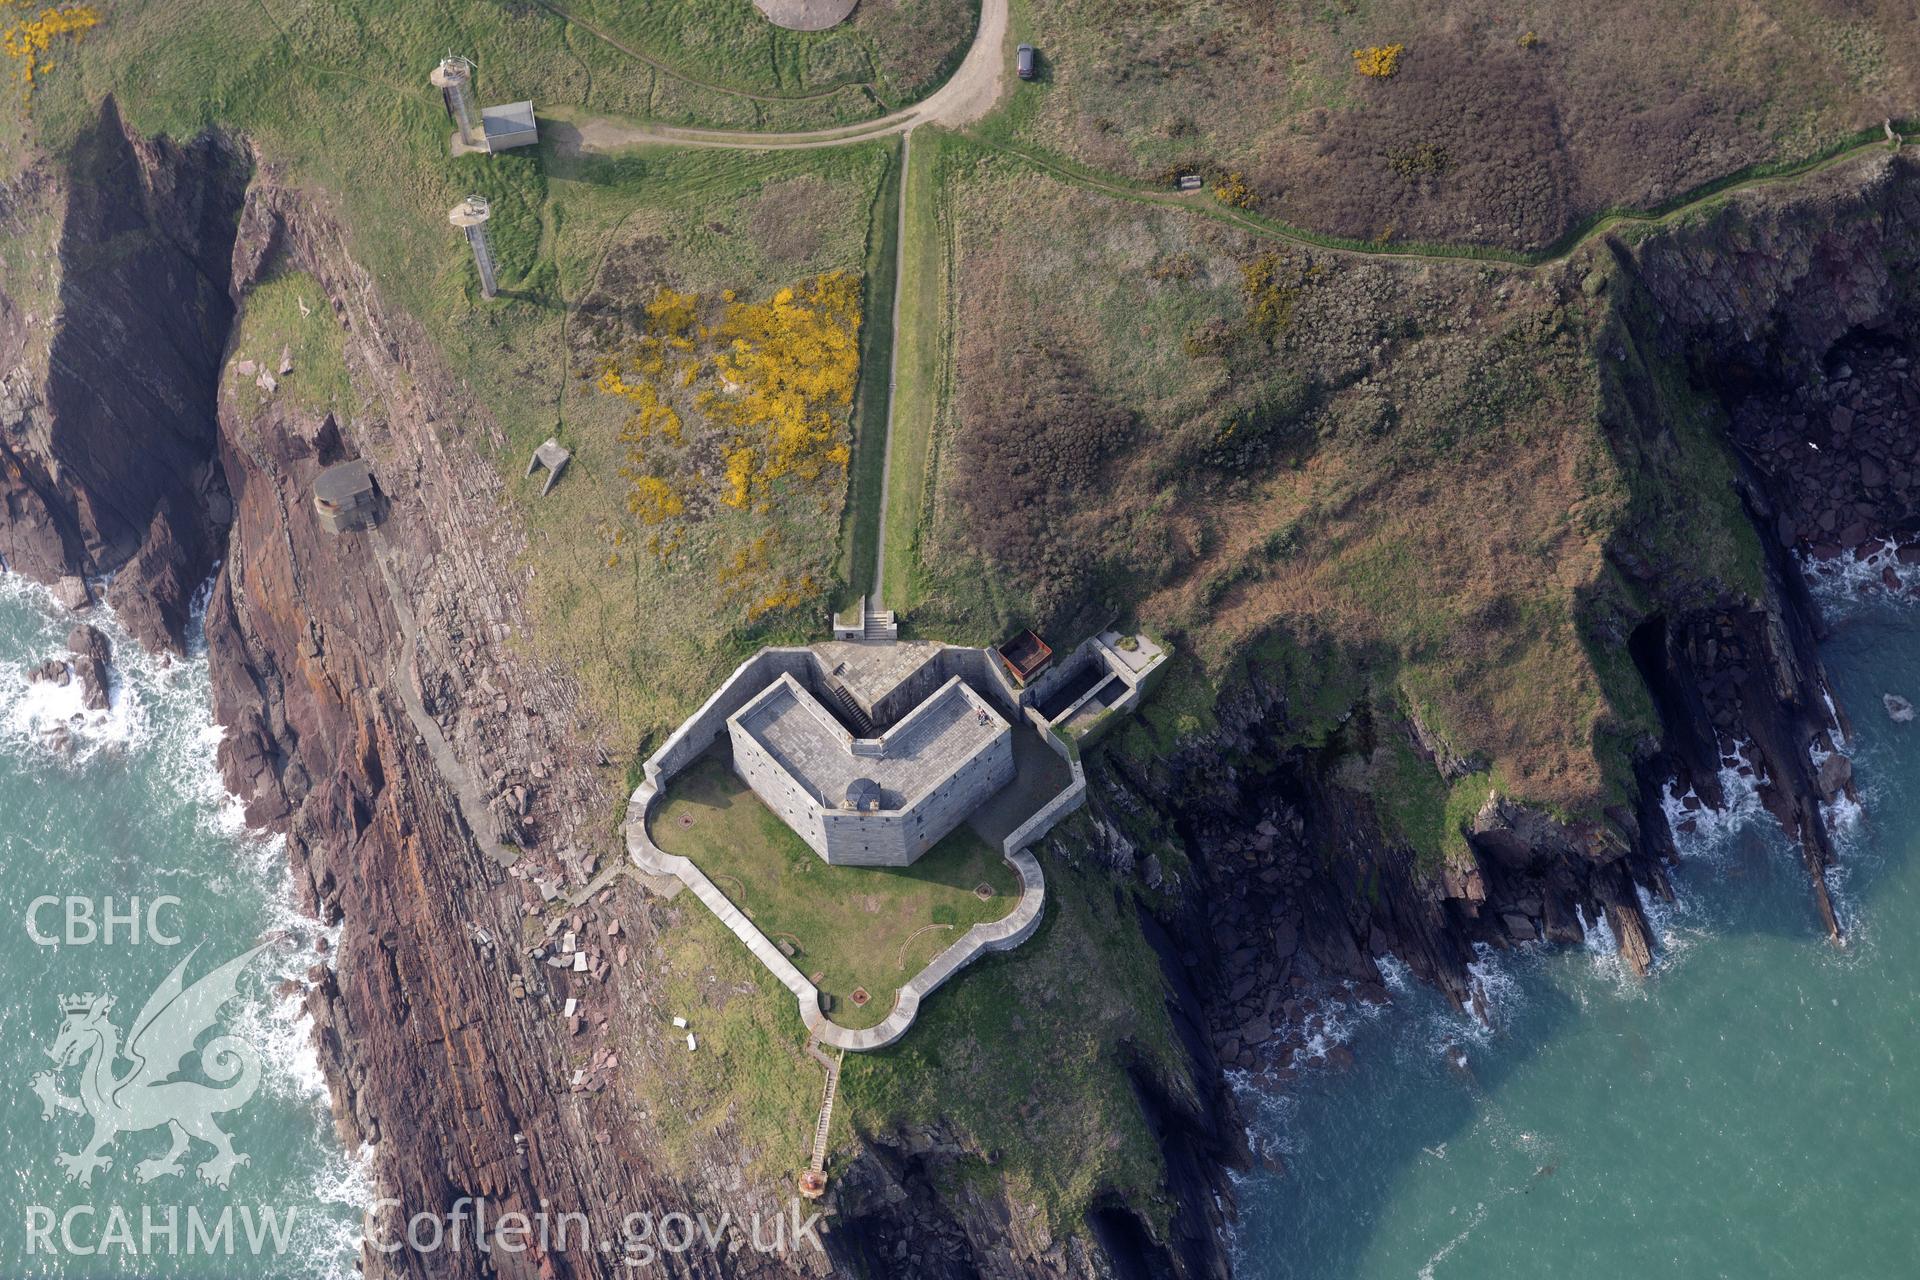 Aerial photography of West Blockhouse taken on 27th March 2017. Baseline aerial reconnaissance survey for the CHERISH Project. ? Crown: CHERISH PROJECT 2017. Produced with EU funds through the Ireland Wales Co-operation Programme 2014-2020. All material made freely available through the Open Government Licence.